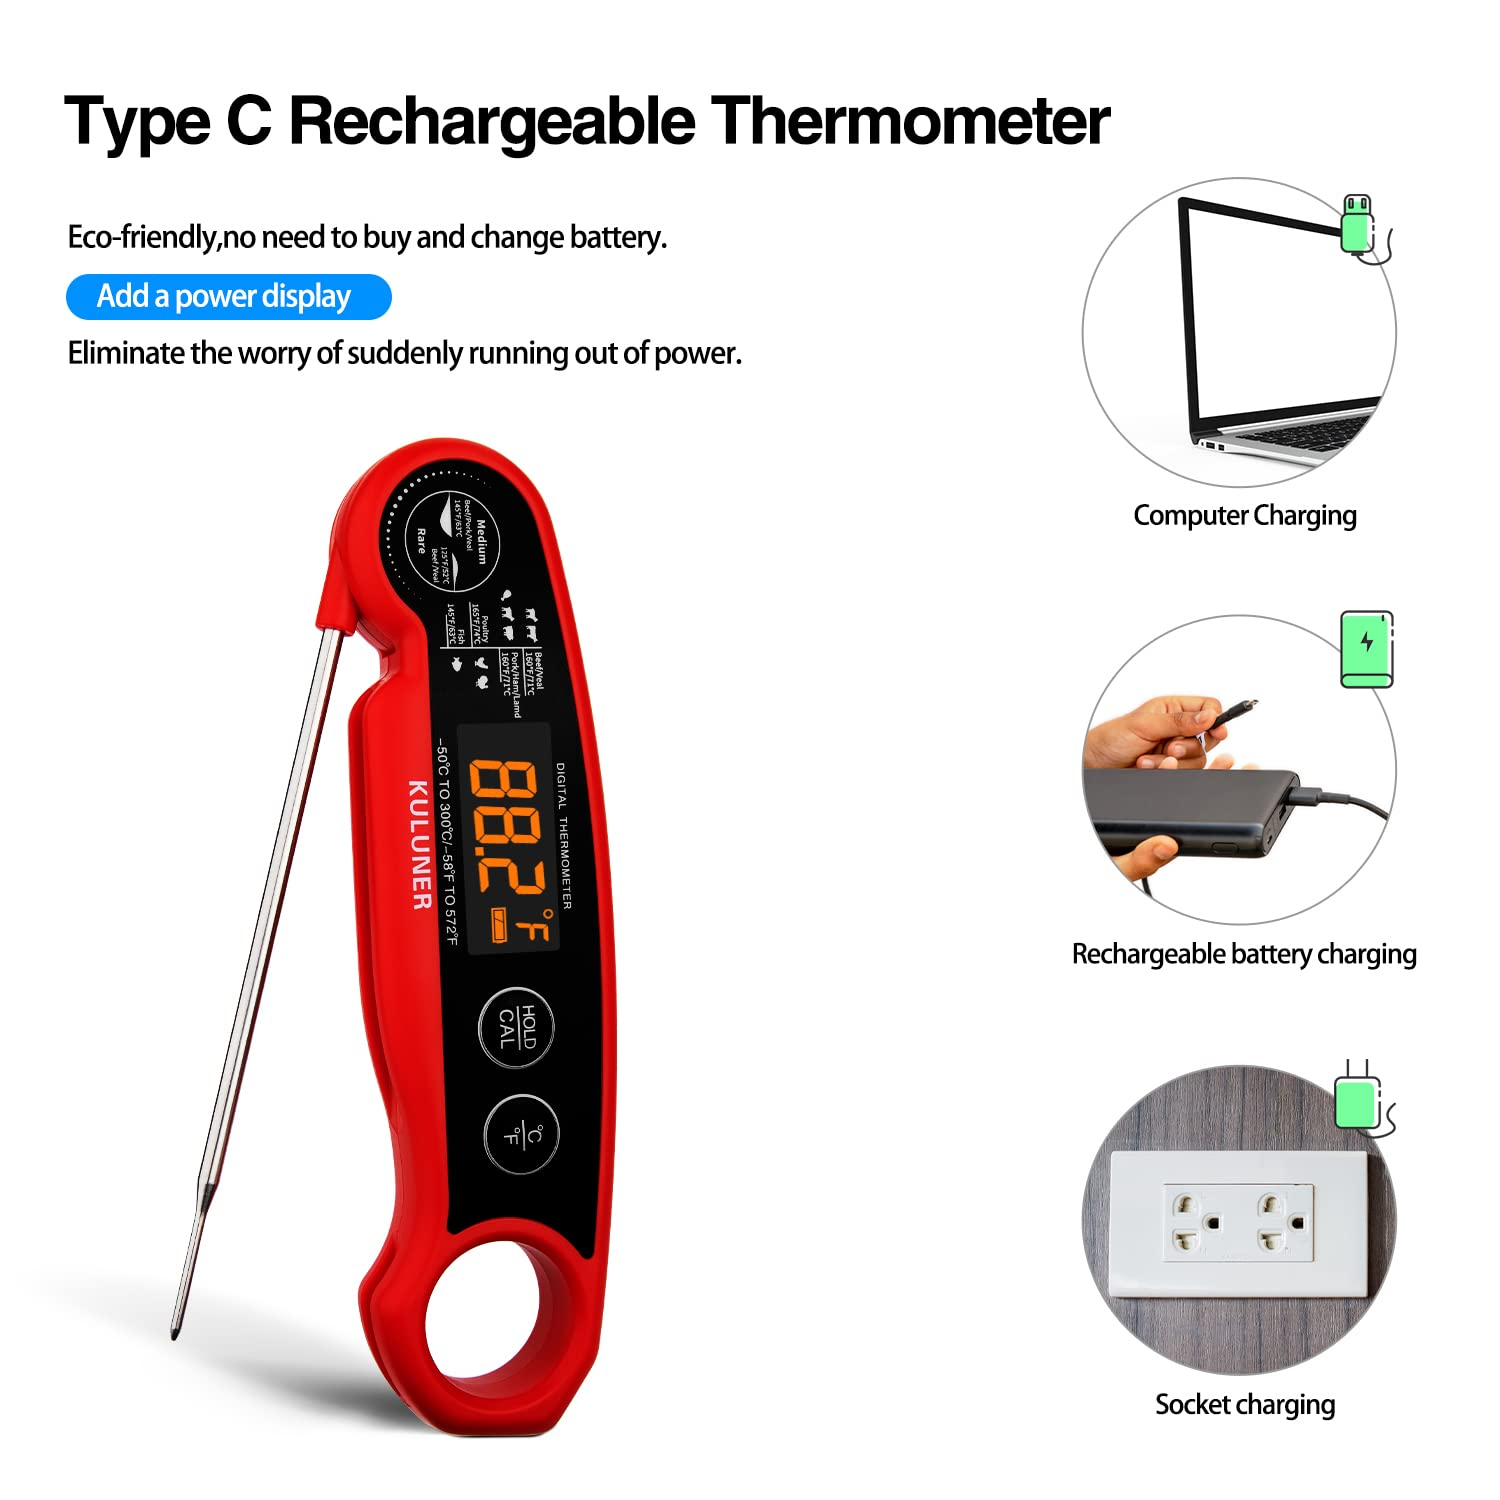 Get an instant read thermometer